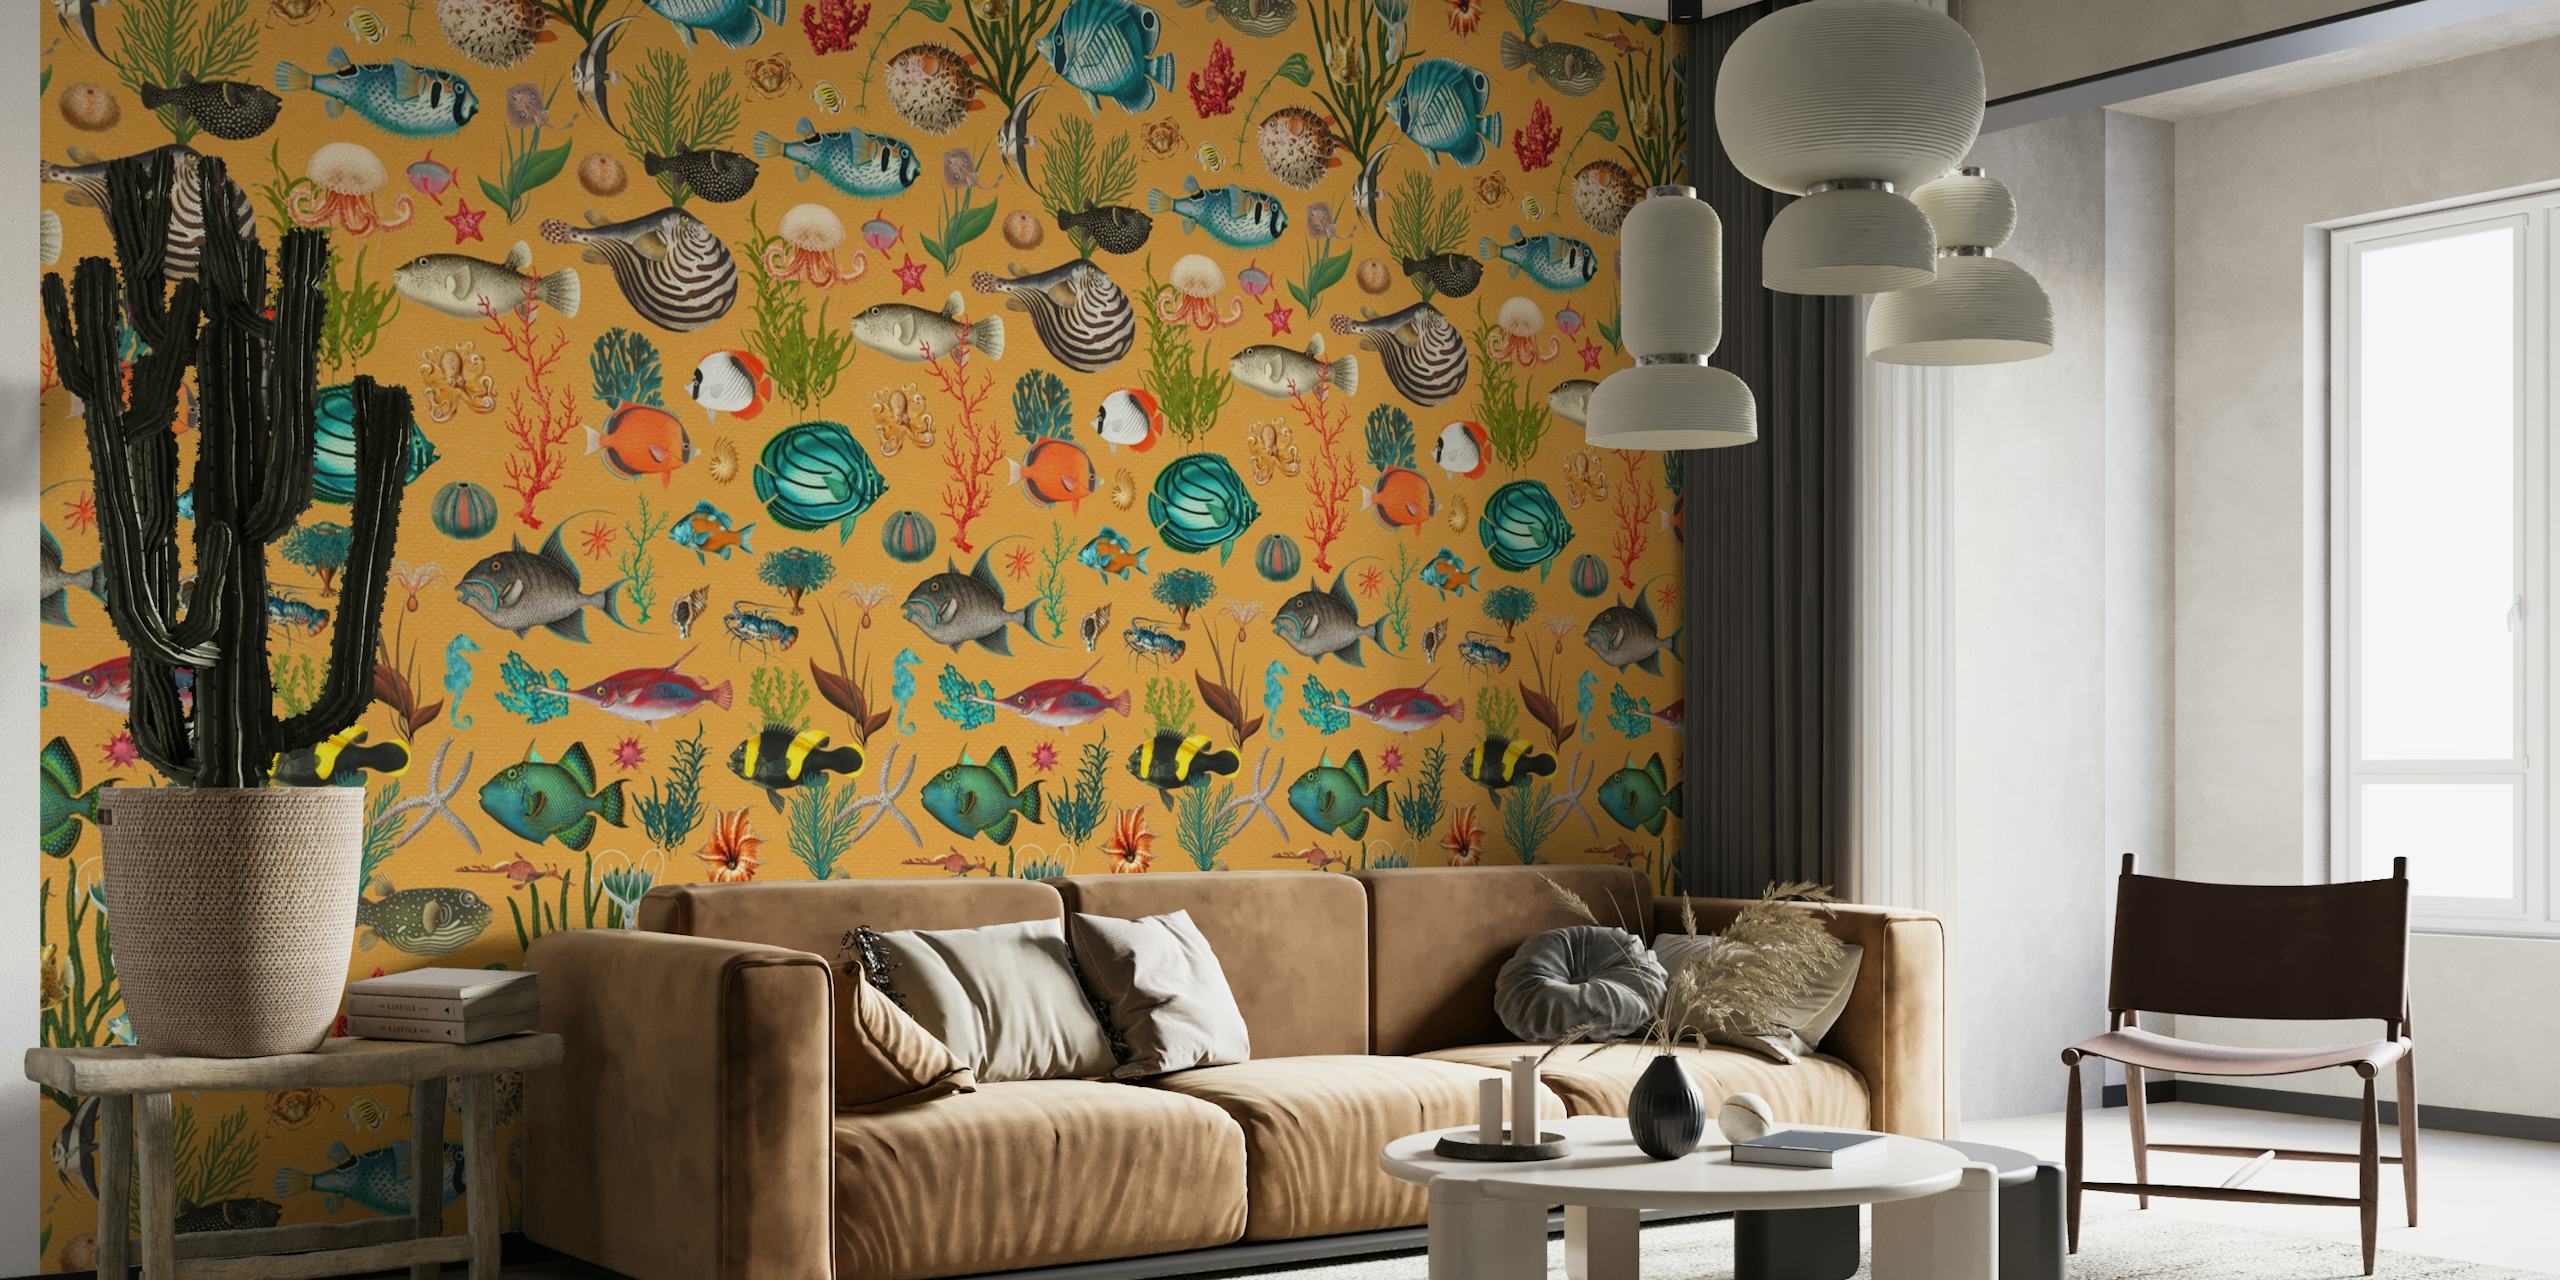 Oceania themed wall mural with mustard yellow background, featuring sea turtles, coral, and tropical fish